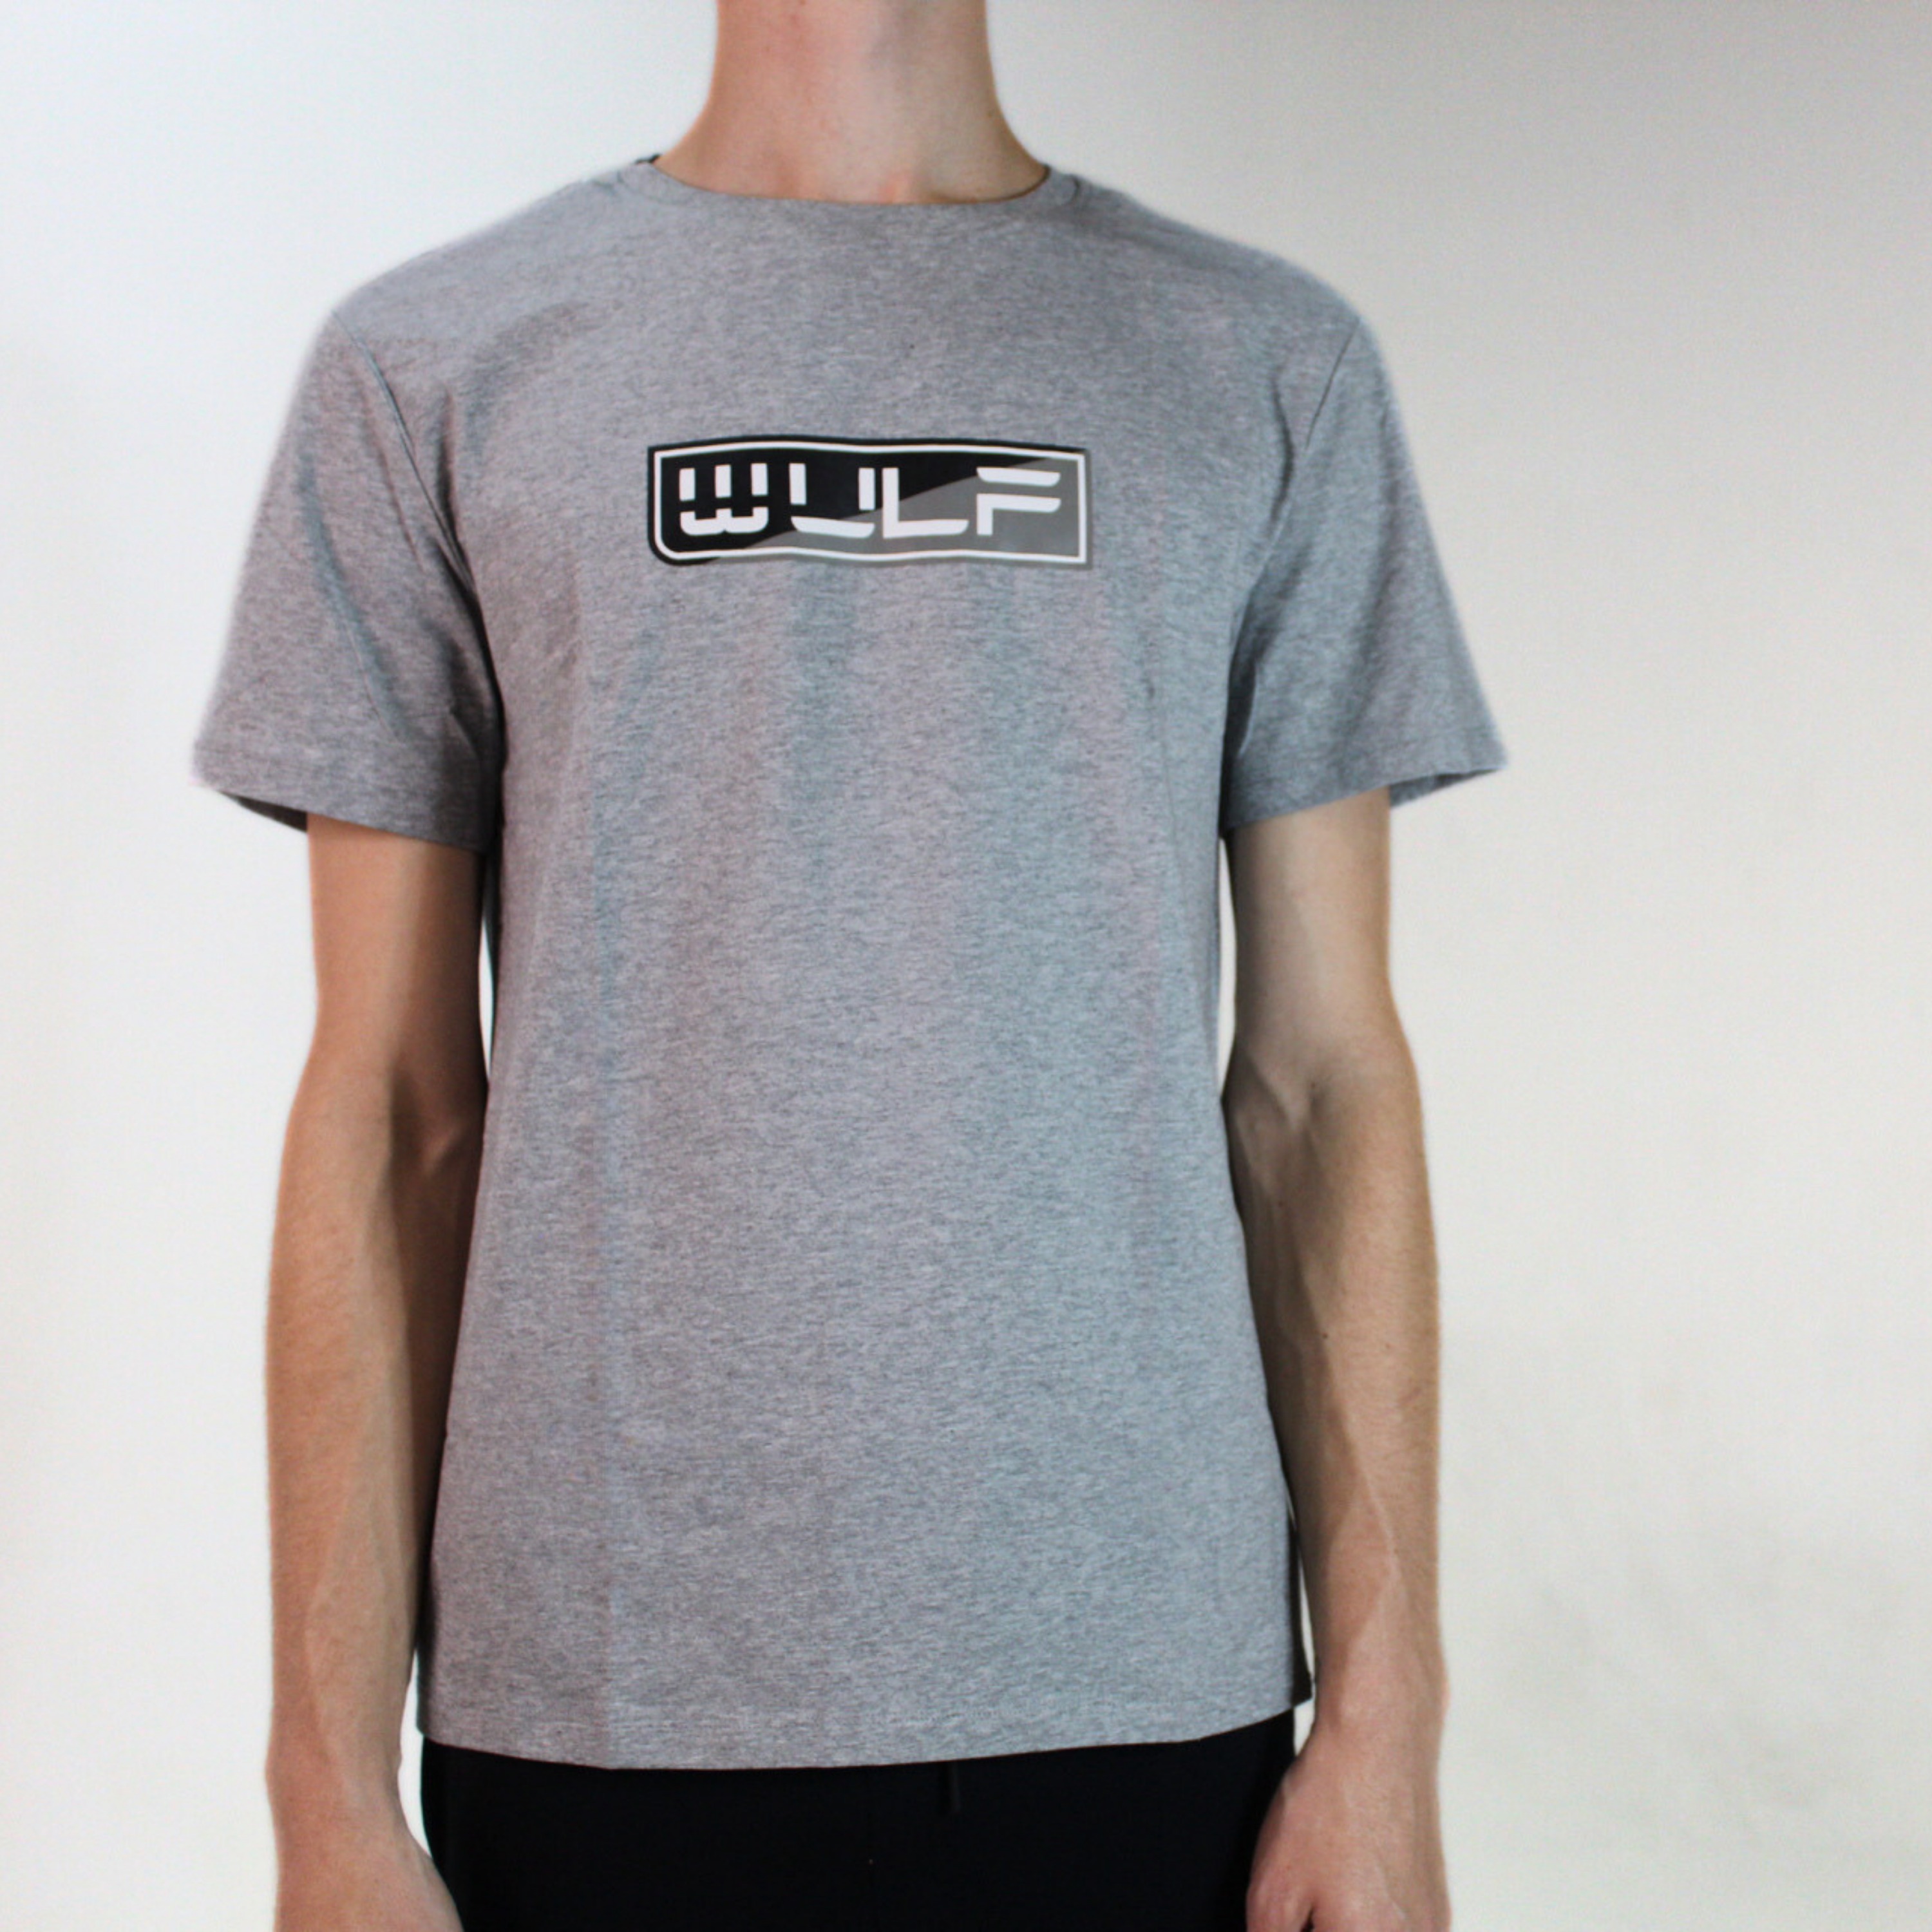 Expand your wardrobe with our Men's Gray Crew-Neck T-Shirt. Features black and white Wulf logo, back icon. Cotton and spandex where comfort meets distinction.